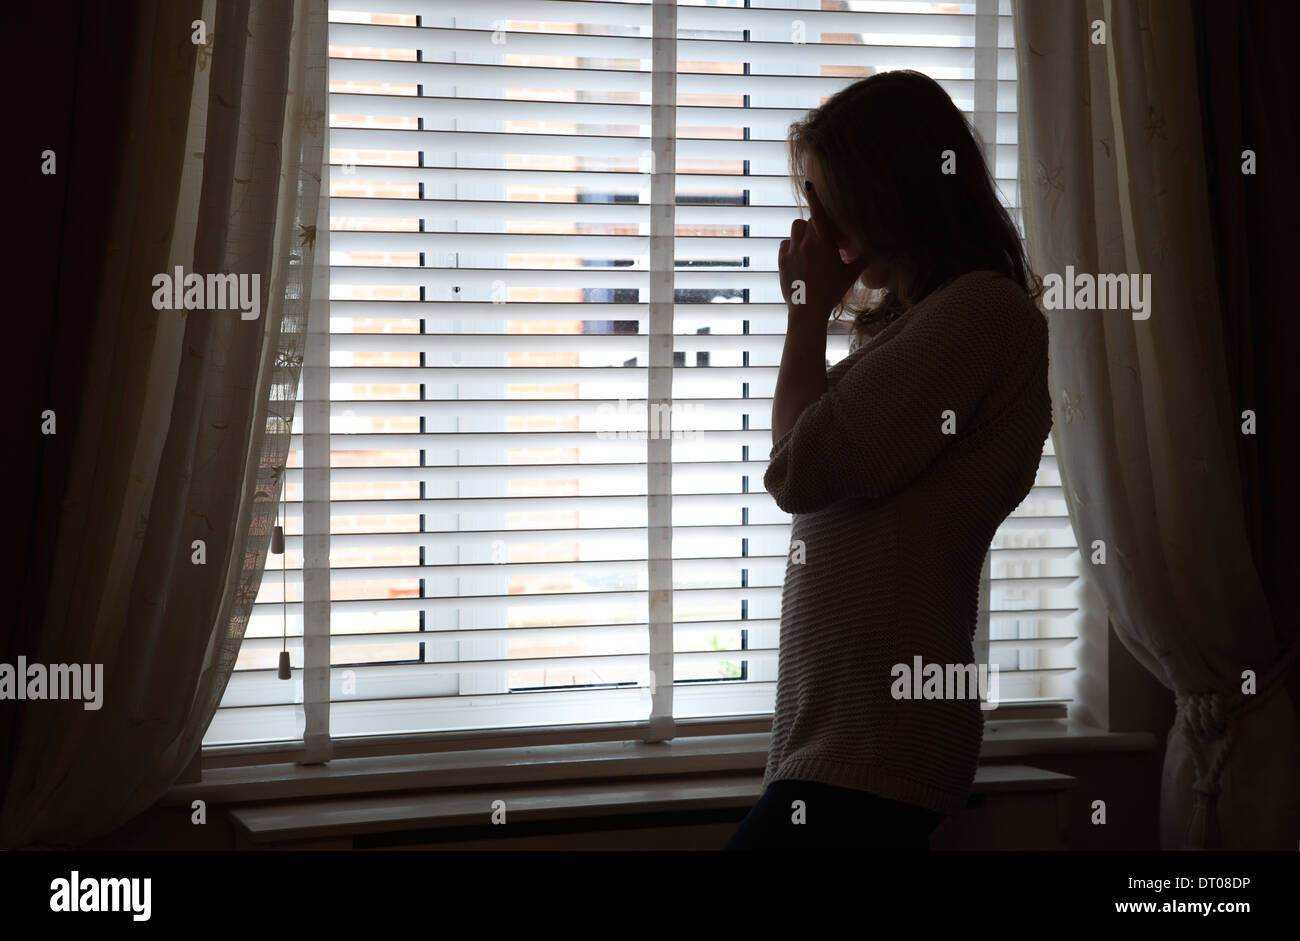 Silhouette of woman standing with her head in hands by a window. Over shoulder back/side view. Stock Photo